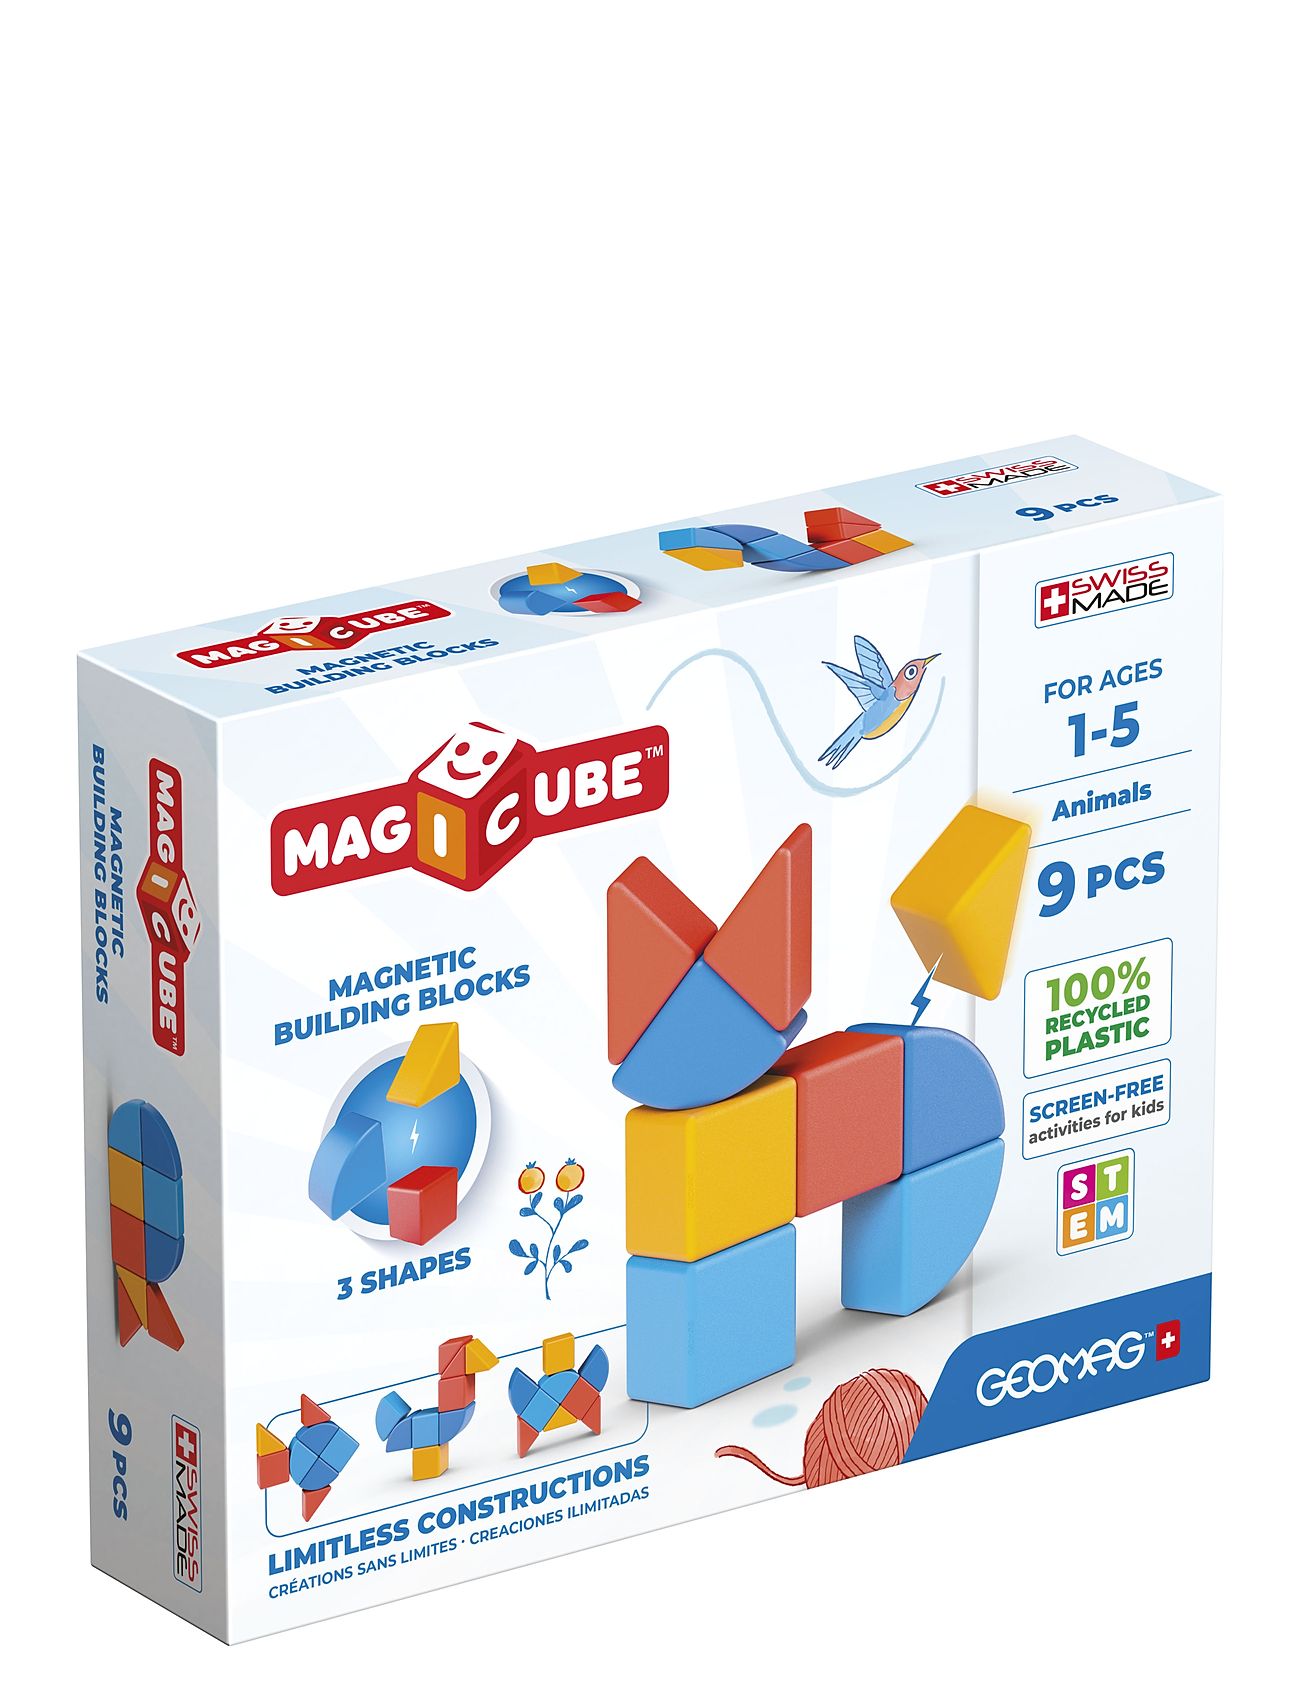 Geomag Magicube Shapes Animals Recycled 9 Pcs Toys Building Sets & Blocks Building Blocks Multi/patterned Geomag